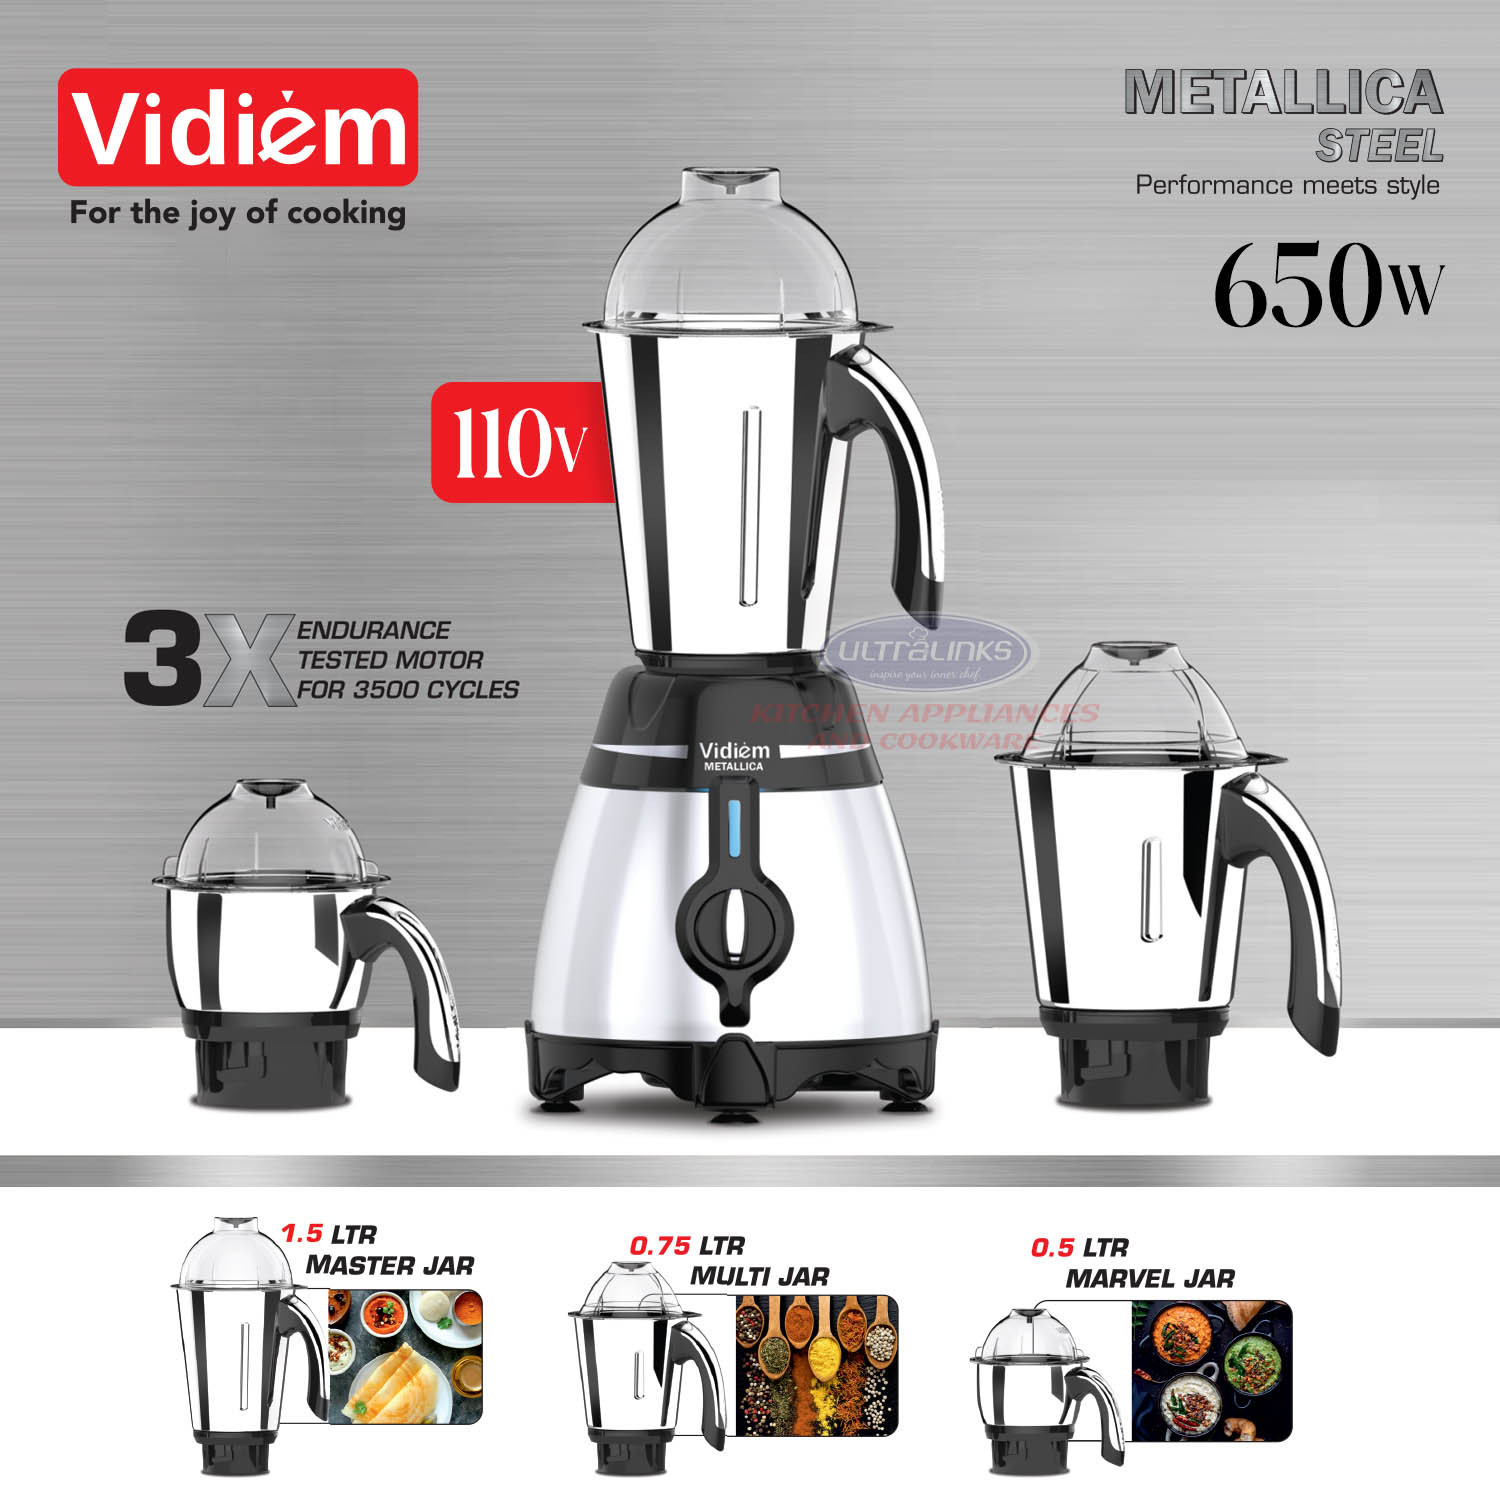 vidiem-metallica-steele-650w-110v-stainless-steel-jars-indian-mixer-grinder-with-spice-coffee-grinder-jar-for-use-in-canada-usa3